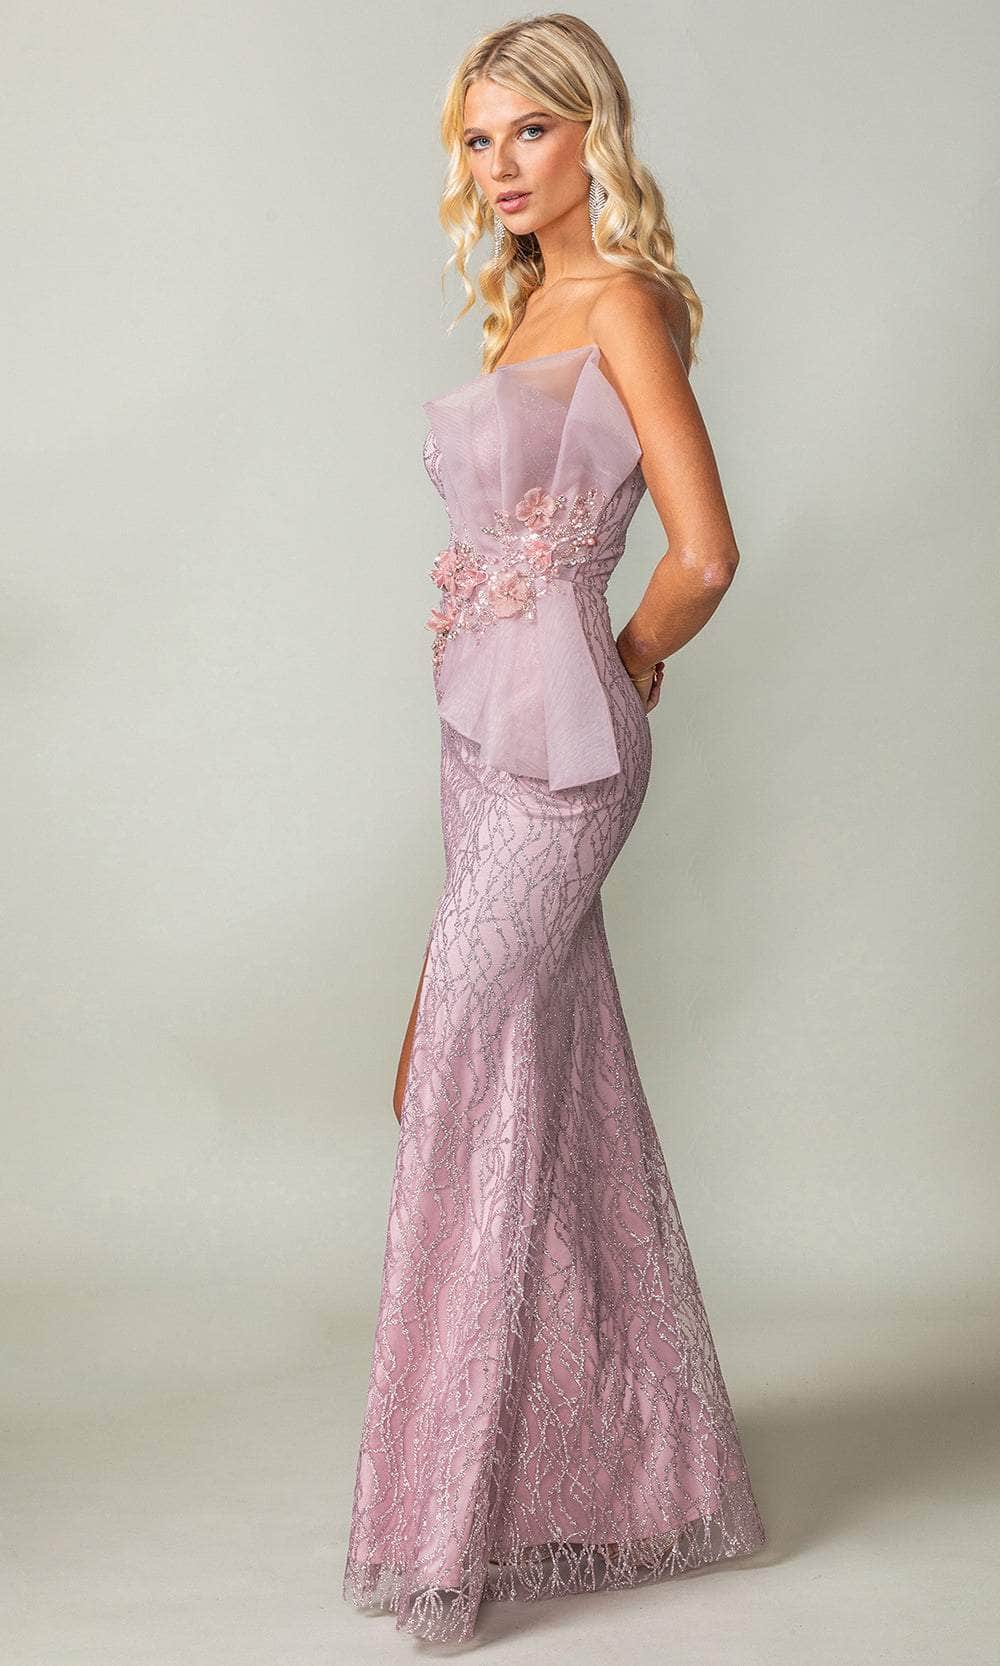 Dancing Queen 4394 - Sweetheart Glitter Prom Gown Prom Dresses 